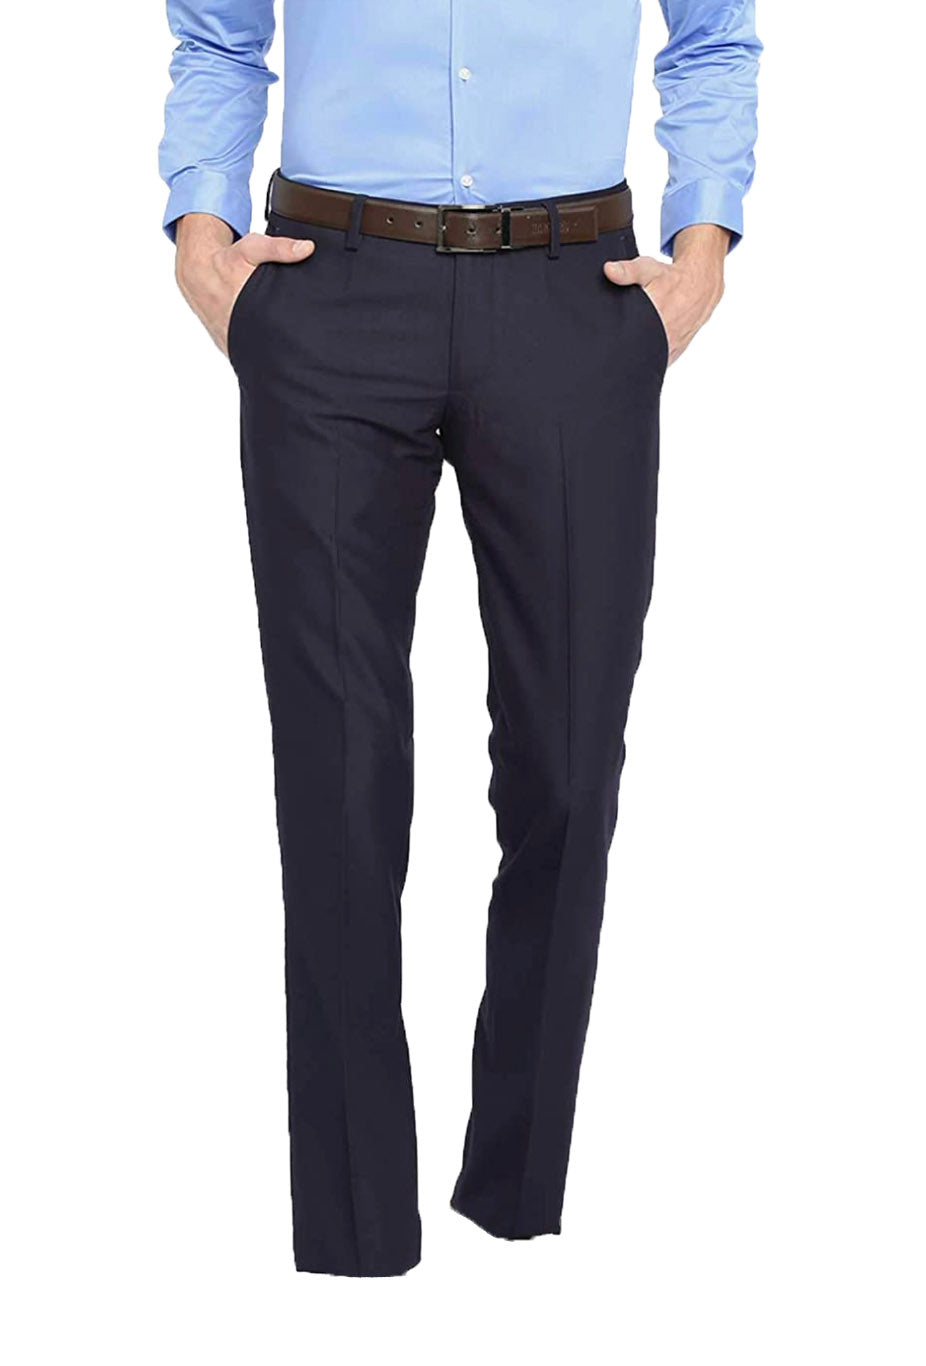 Virginian Senior Youths Slim Fit Trousers (Navy)